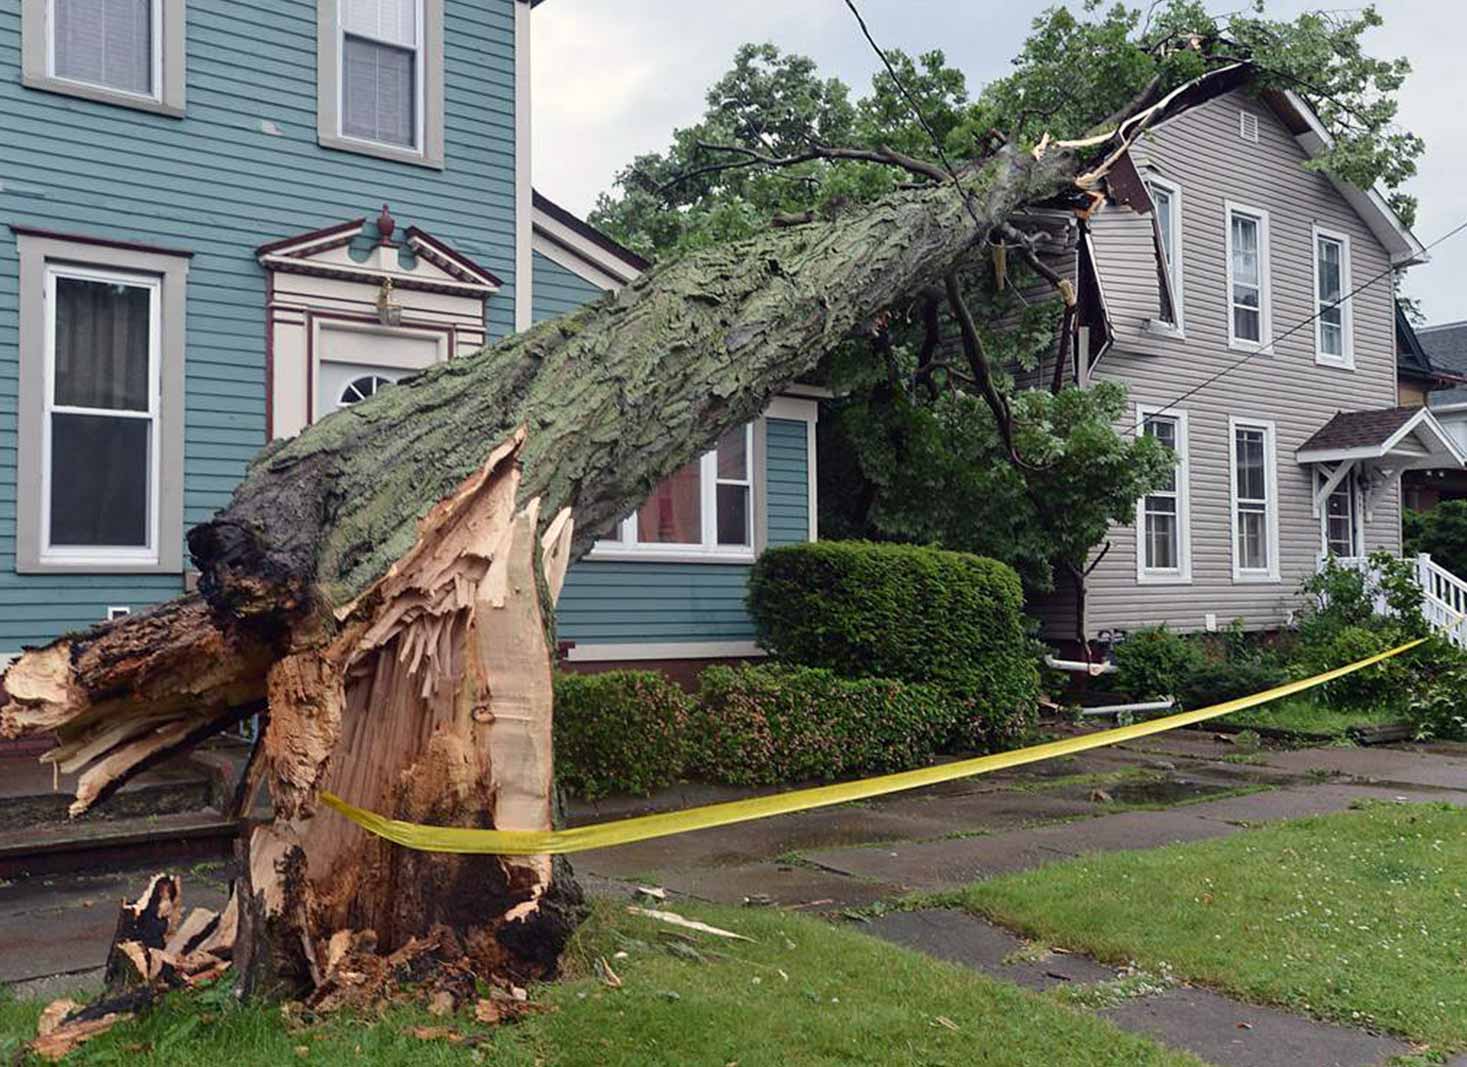 What to do when a neighbour's tree falls on your fence